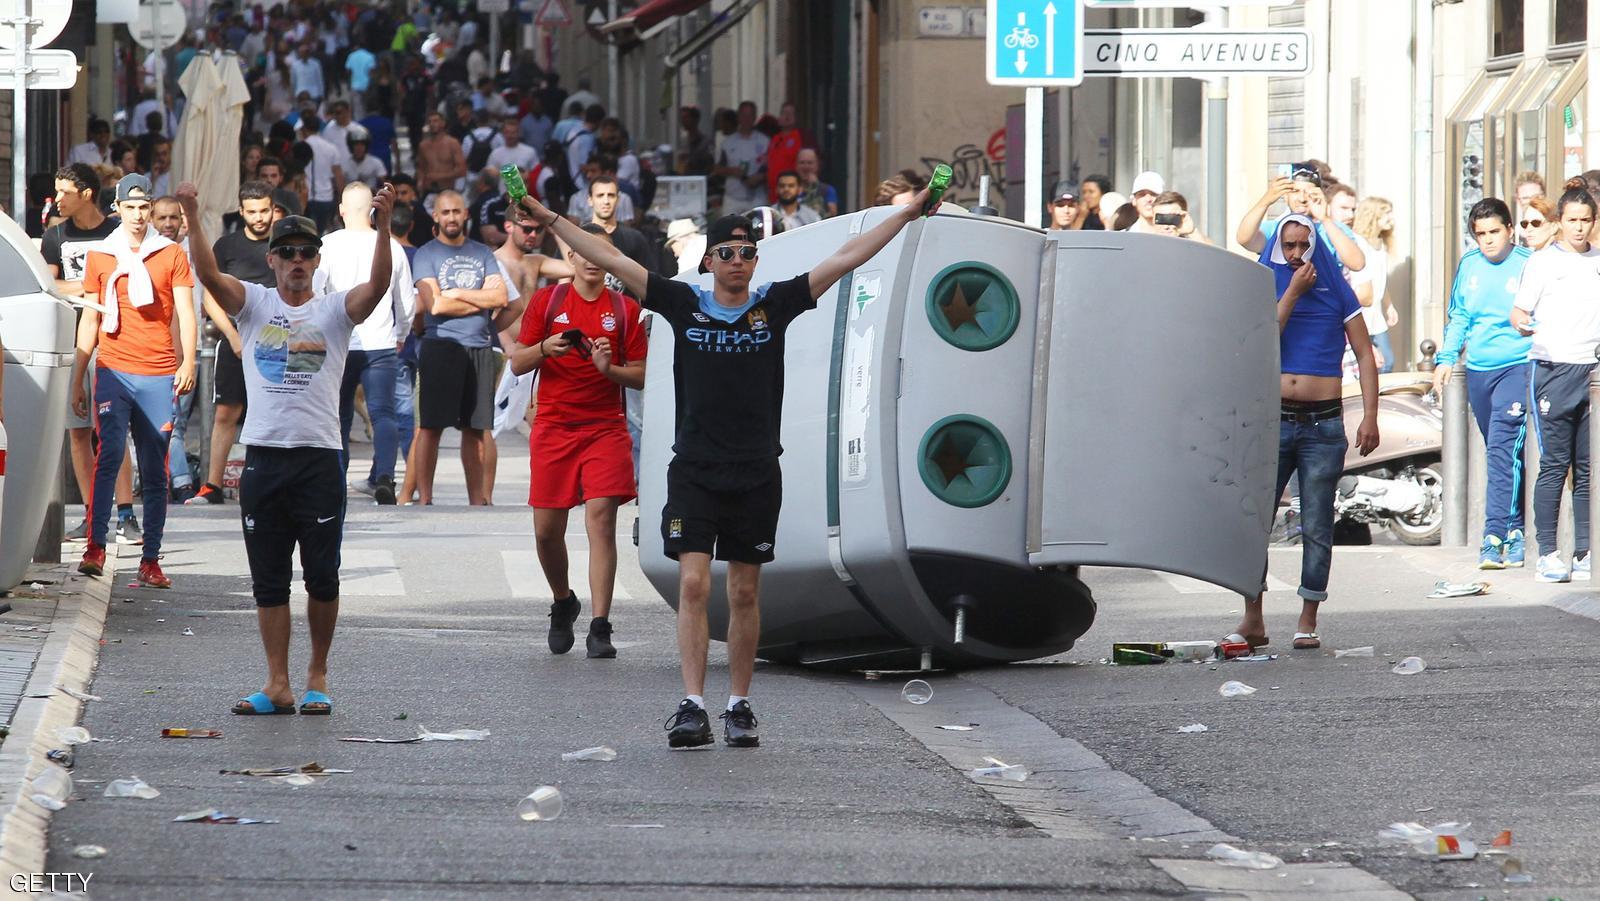 People throw beer cans at English supporters ahead of the Euro 2016 football match England vs Russia, southern France, on June 11, 2016.  Football fans fought pitched battles for the third day in the French city of Marseille ahead of England's European Championship clash with Russia. Bare-chested English and Russian supporters hurled bistro chairs and bottles in the historic Vieux-Port district where the cobbled streets were littered with broken glass and debris.  / AFP / JEAN CHRISTOPHE MAGNENET        (Photo credit should read JEAN CHRISTOPHE MAGNENET/AFP/Getty Images)